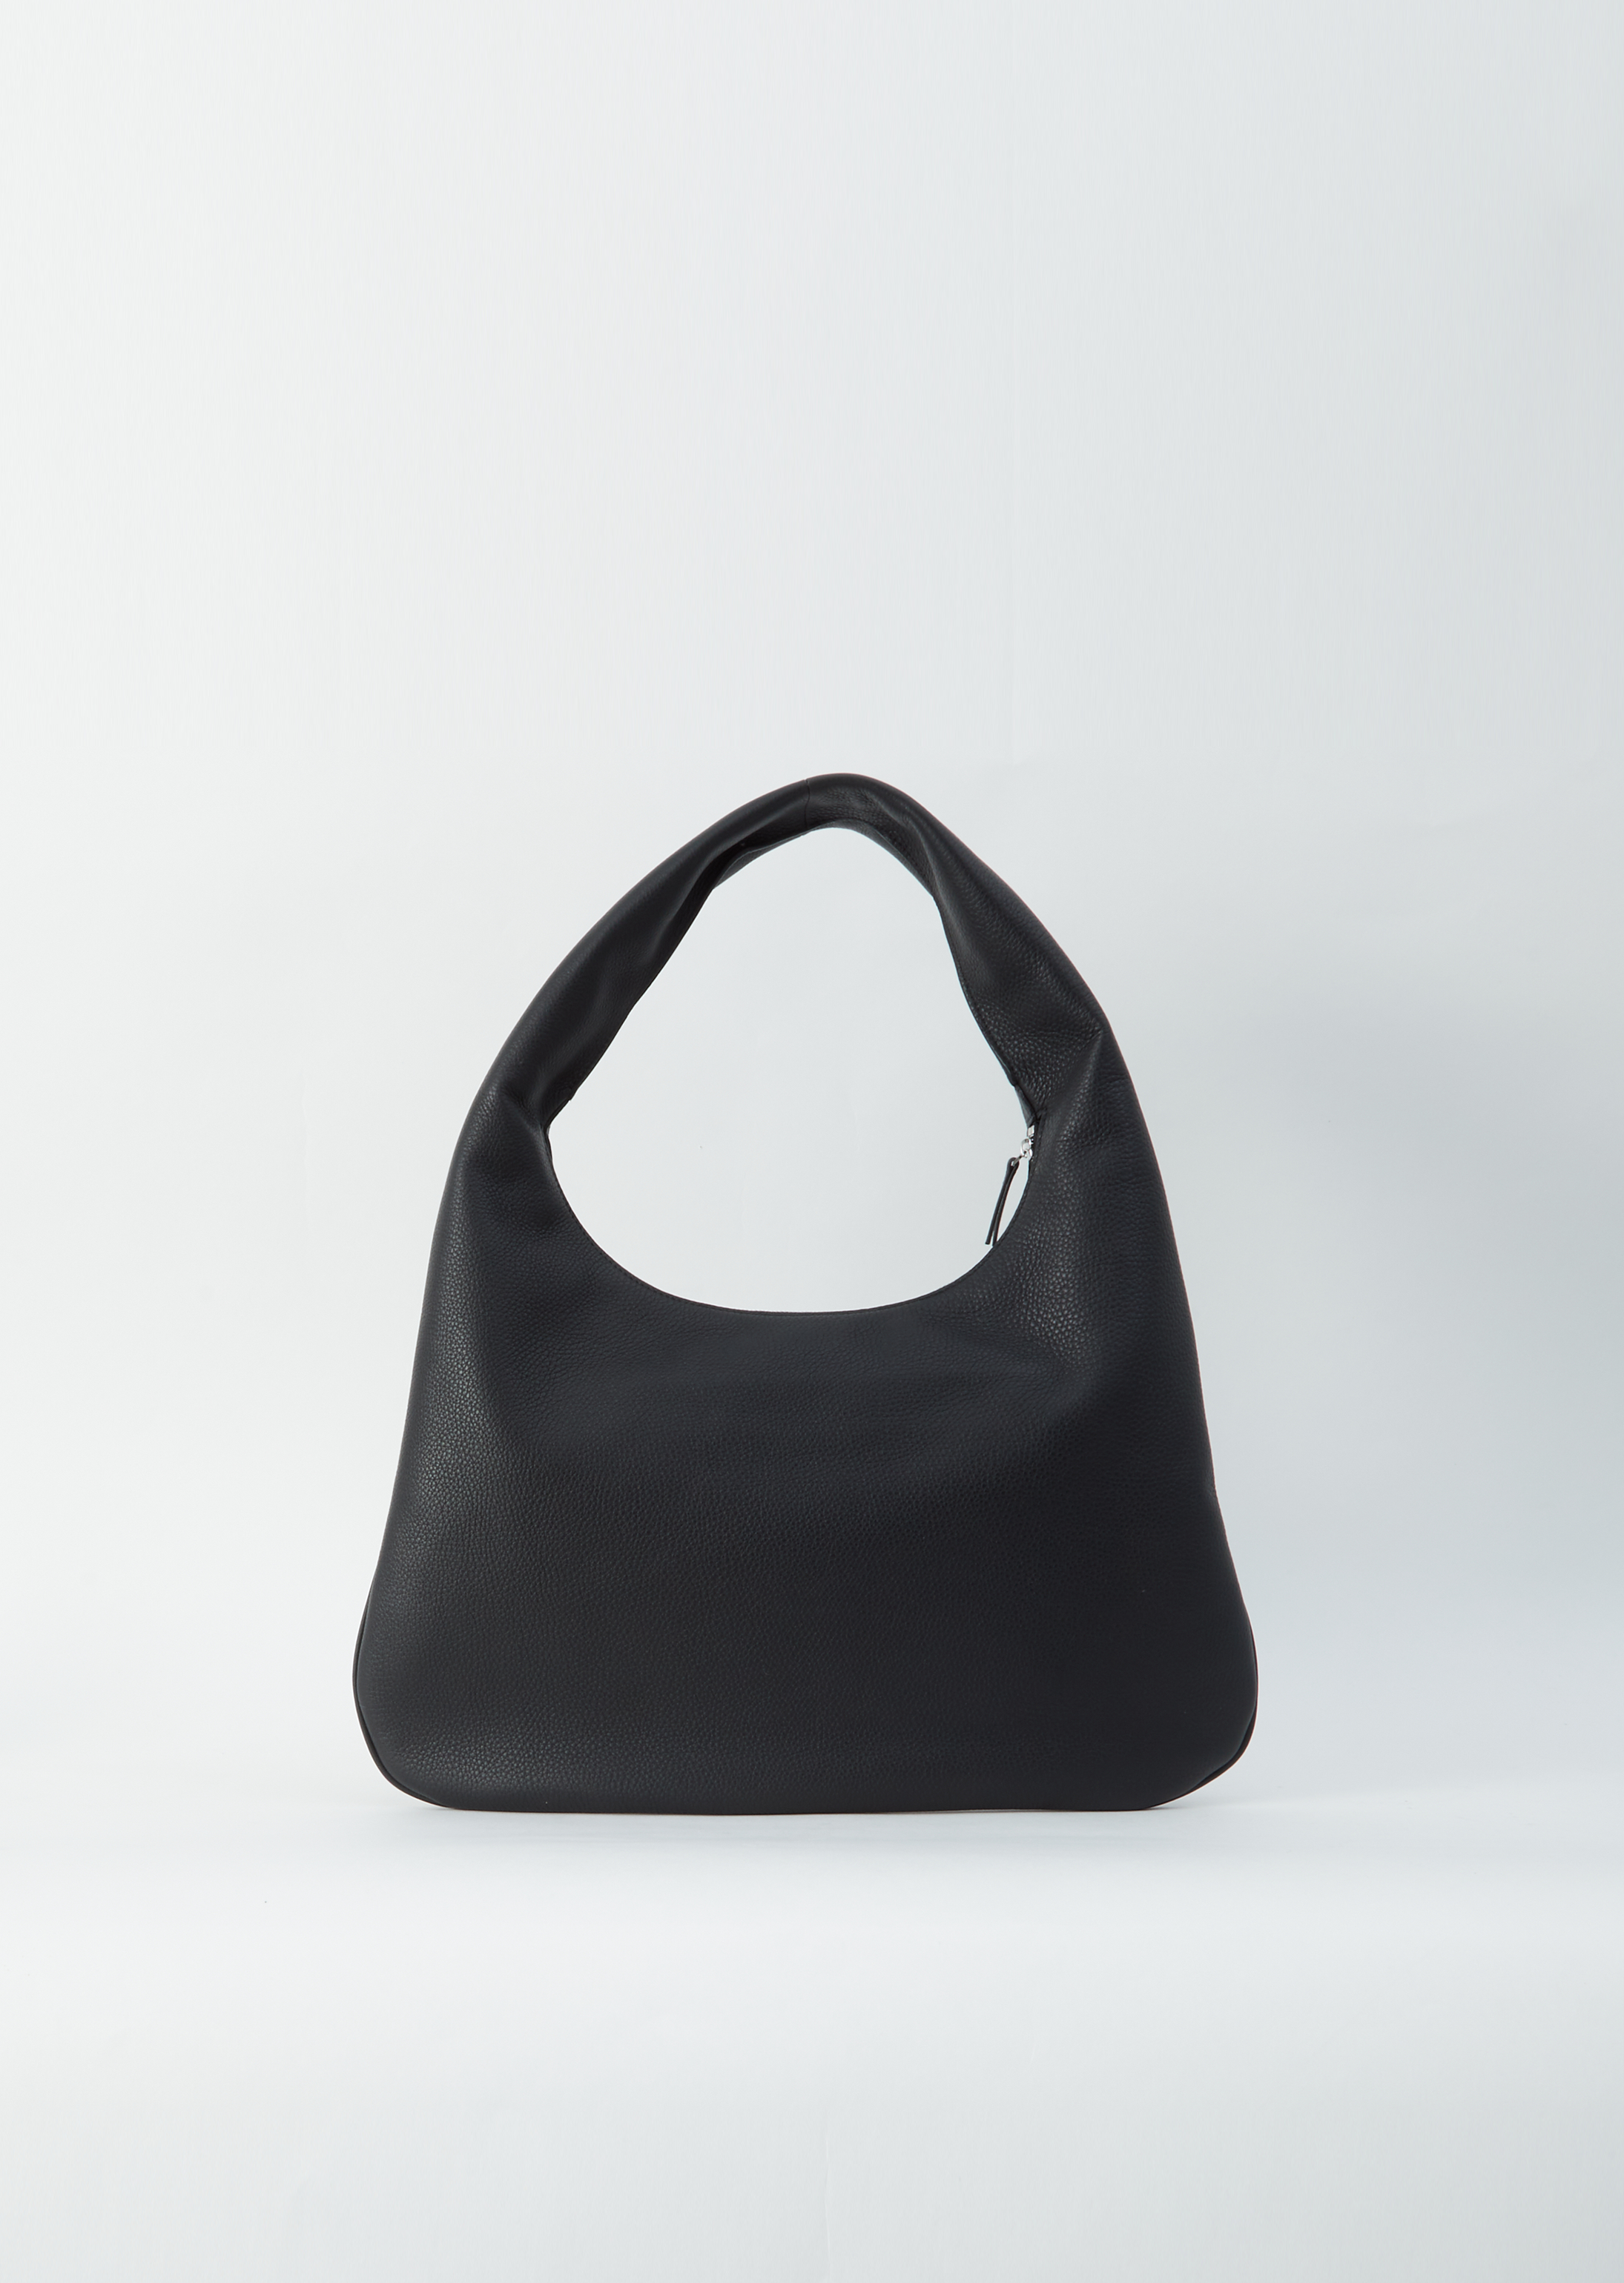 The Row Everyday Medium Leather Shoulder Bag in Black